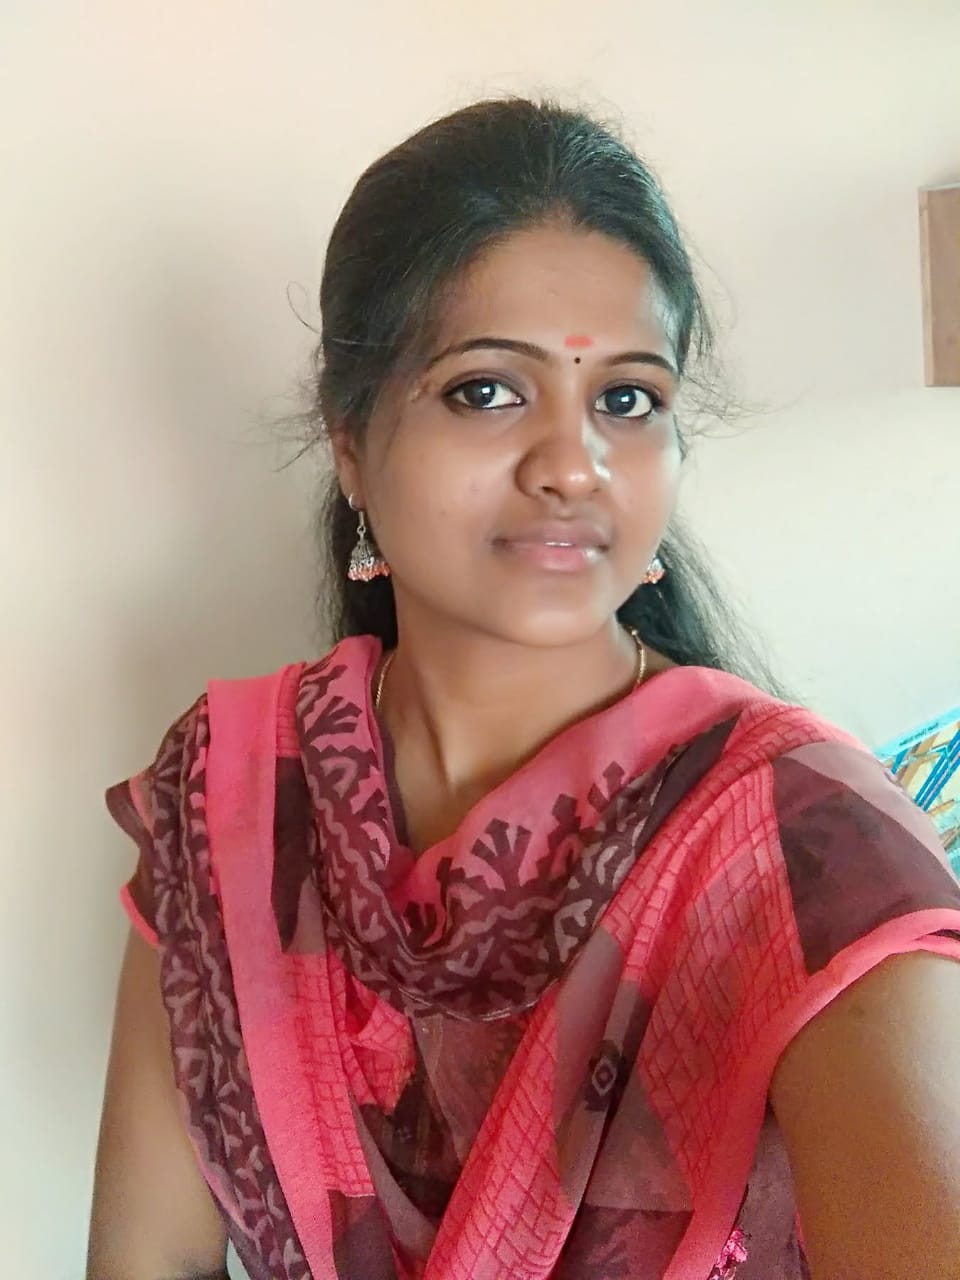 coimbatore independent tamil call girls available anytime....